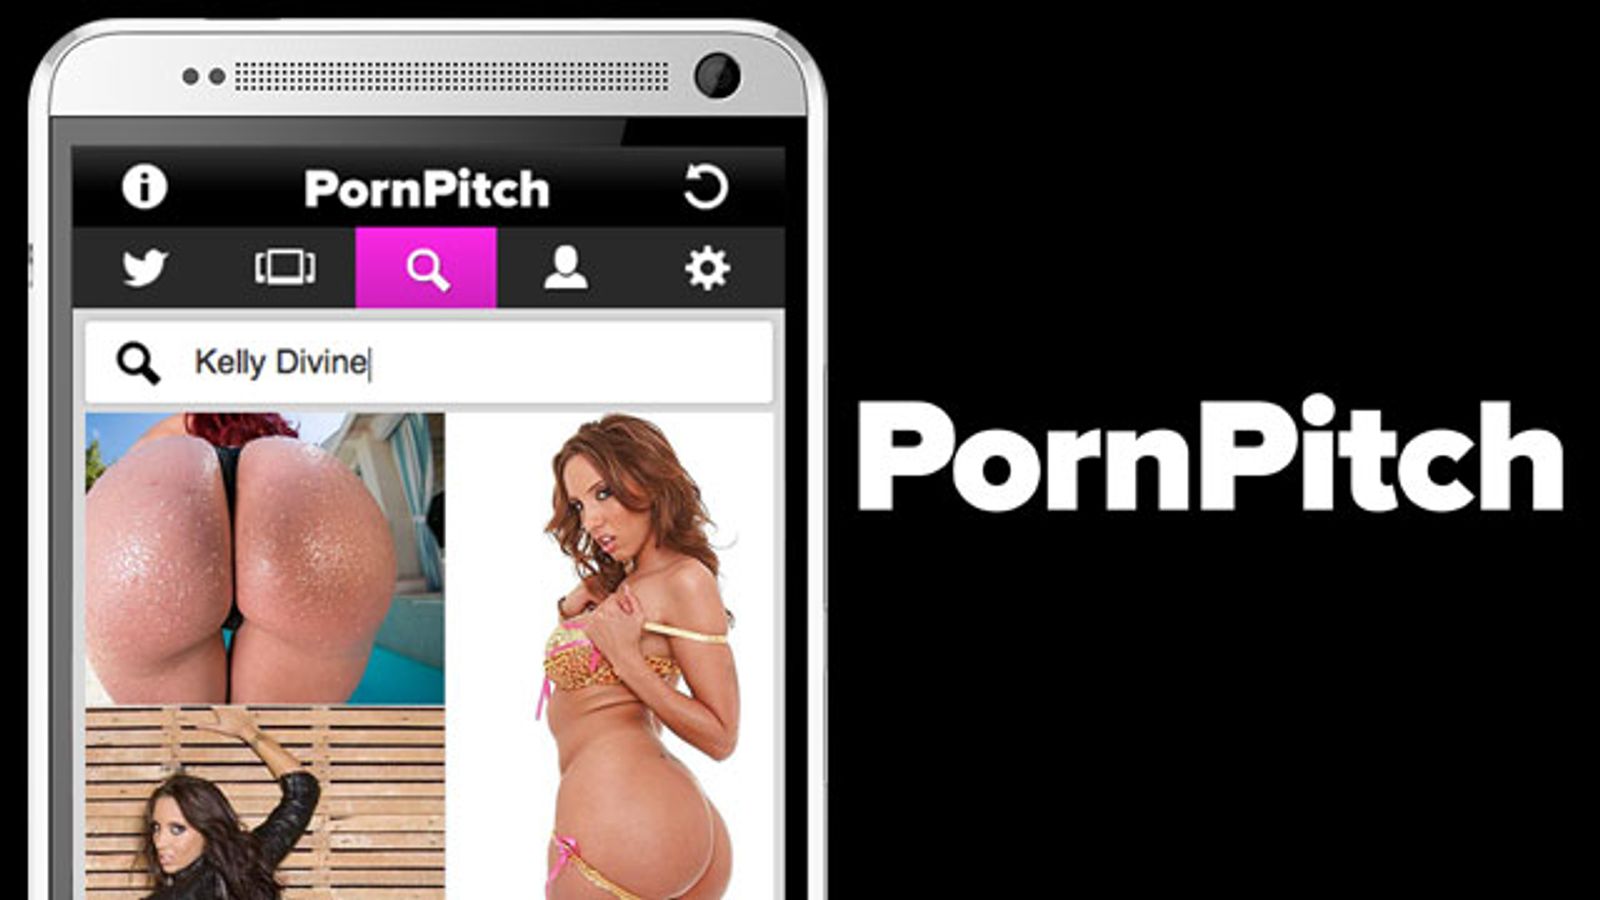 Adult Social Network PornPitch Launches Android App